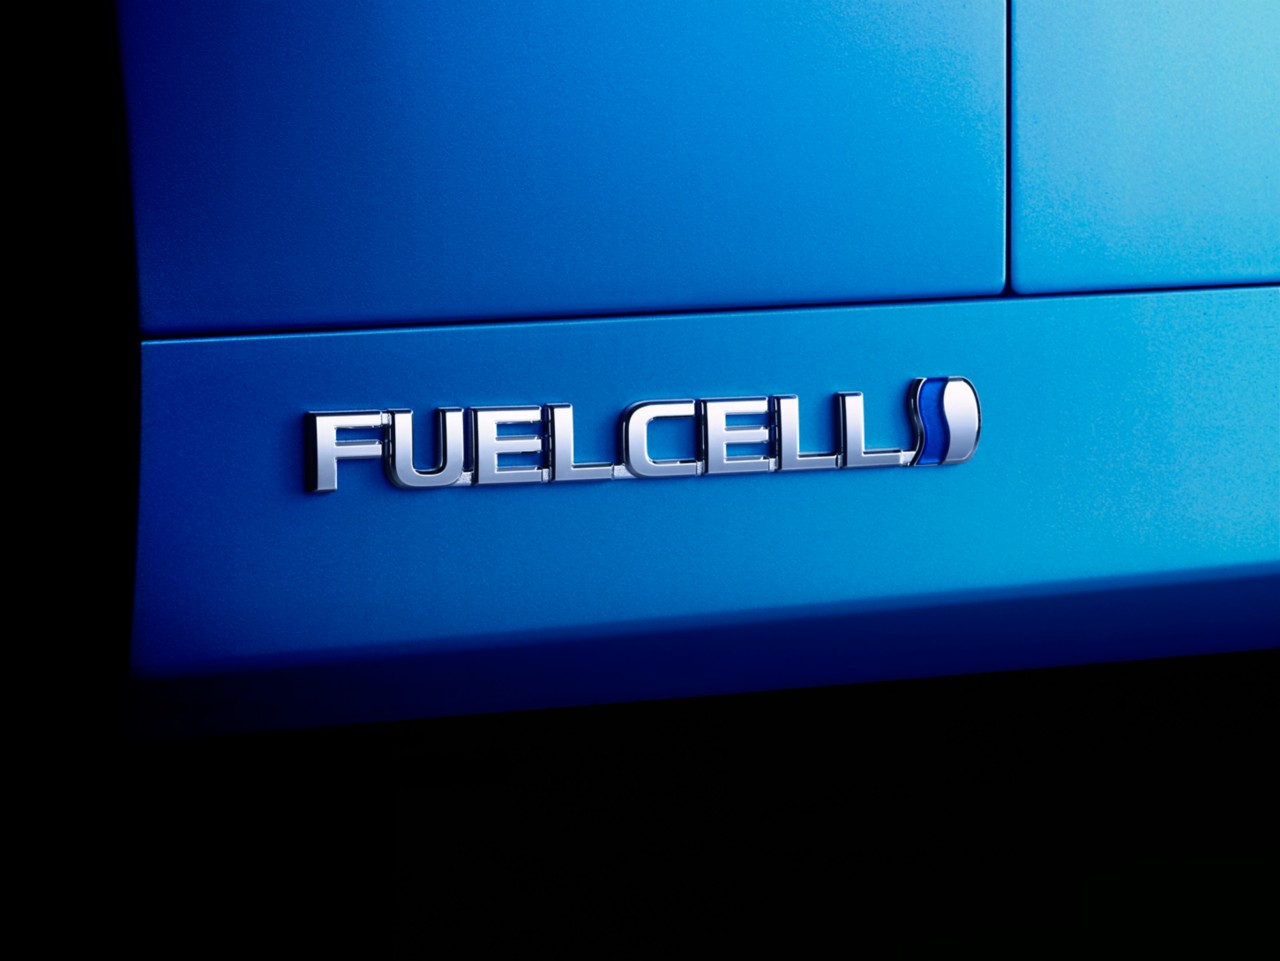 How do we answer critics of fuel cell technology?